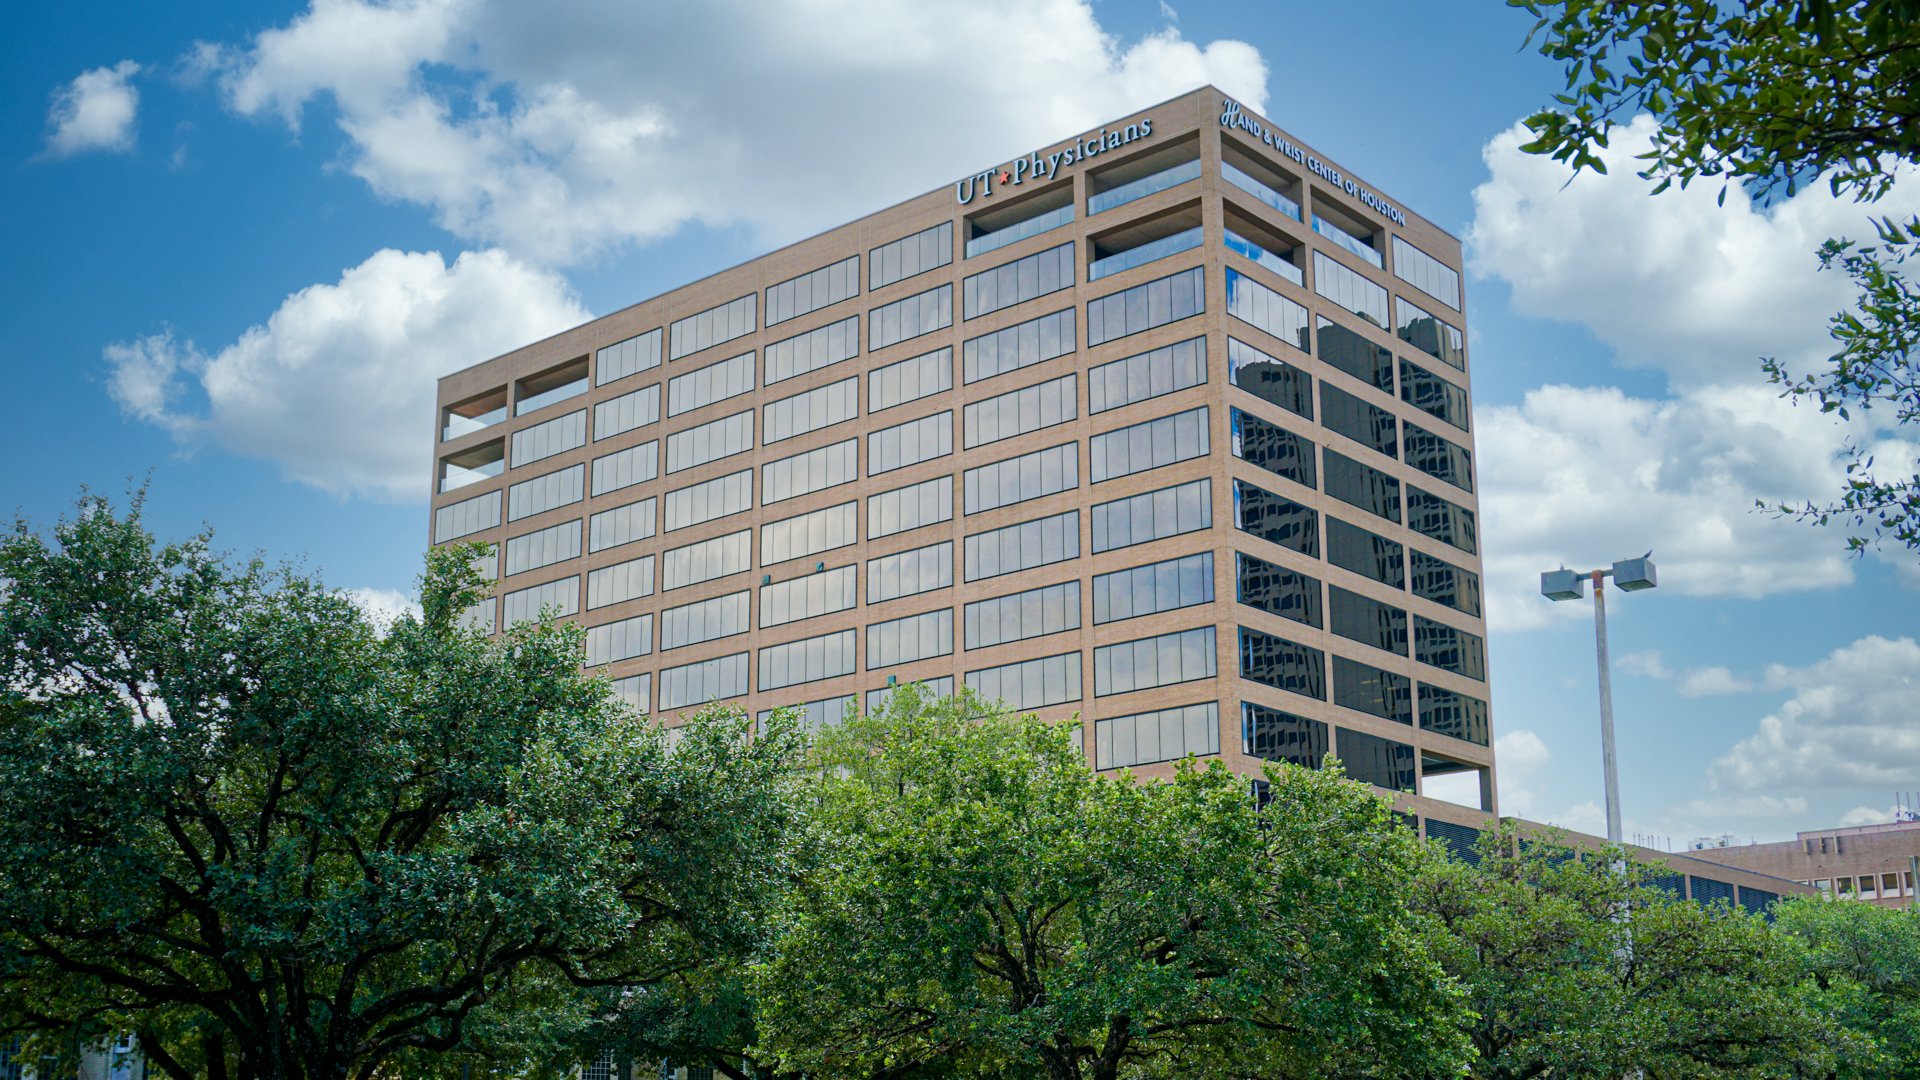 Our Houston clinic is located in the UT Physicians Building